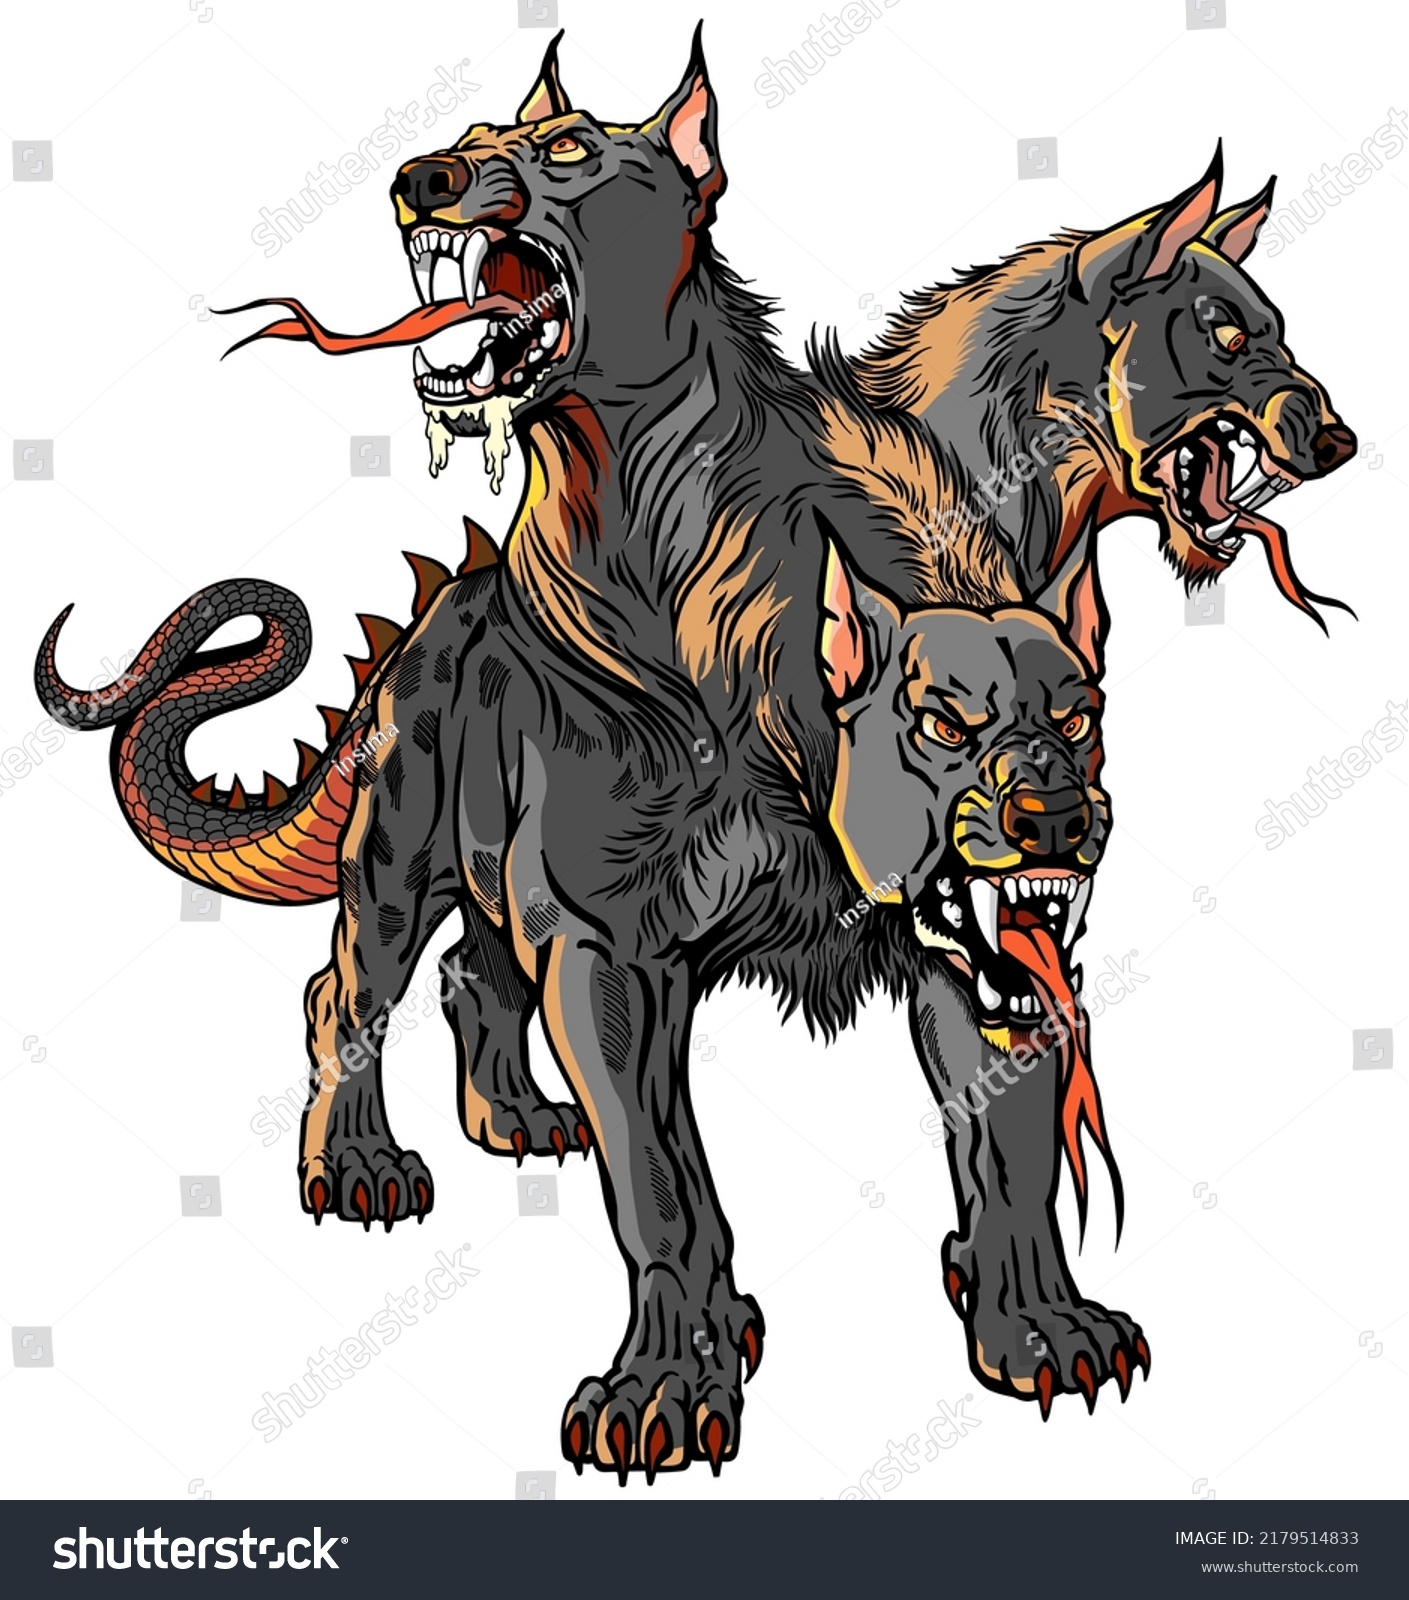 SVG of Cerberus hellhound Mythological three-headed dog the guard of the entrance to hell. Hound of Hades a black beast of the underworld. Standing pose, front view. Isolated vector illustration svg